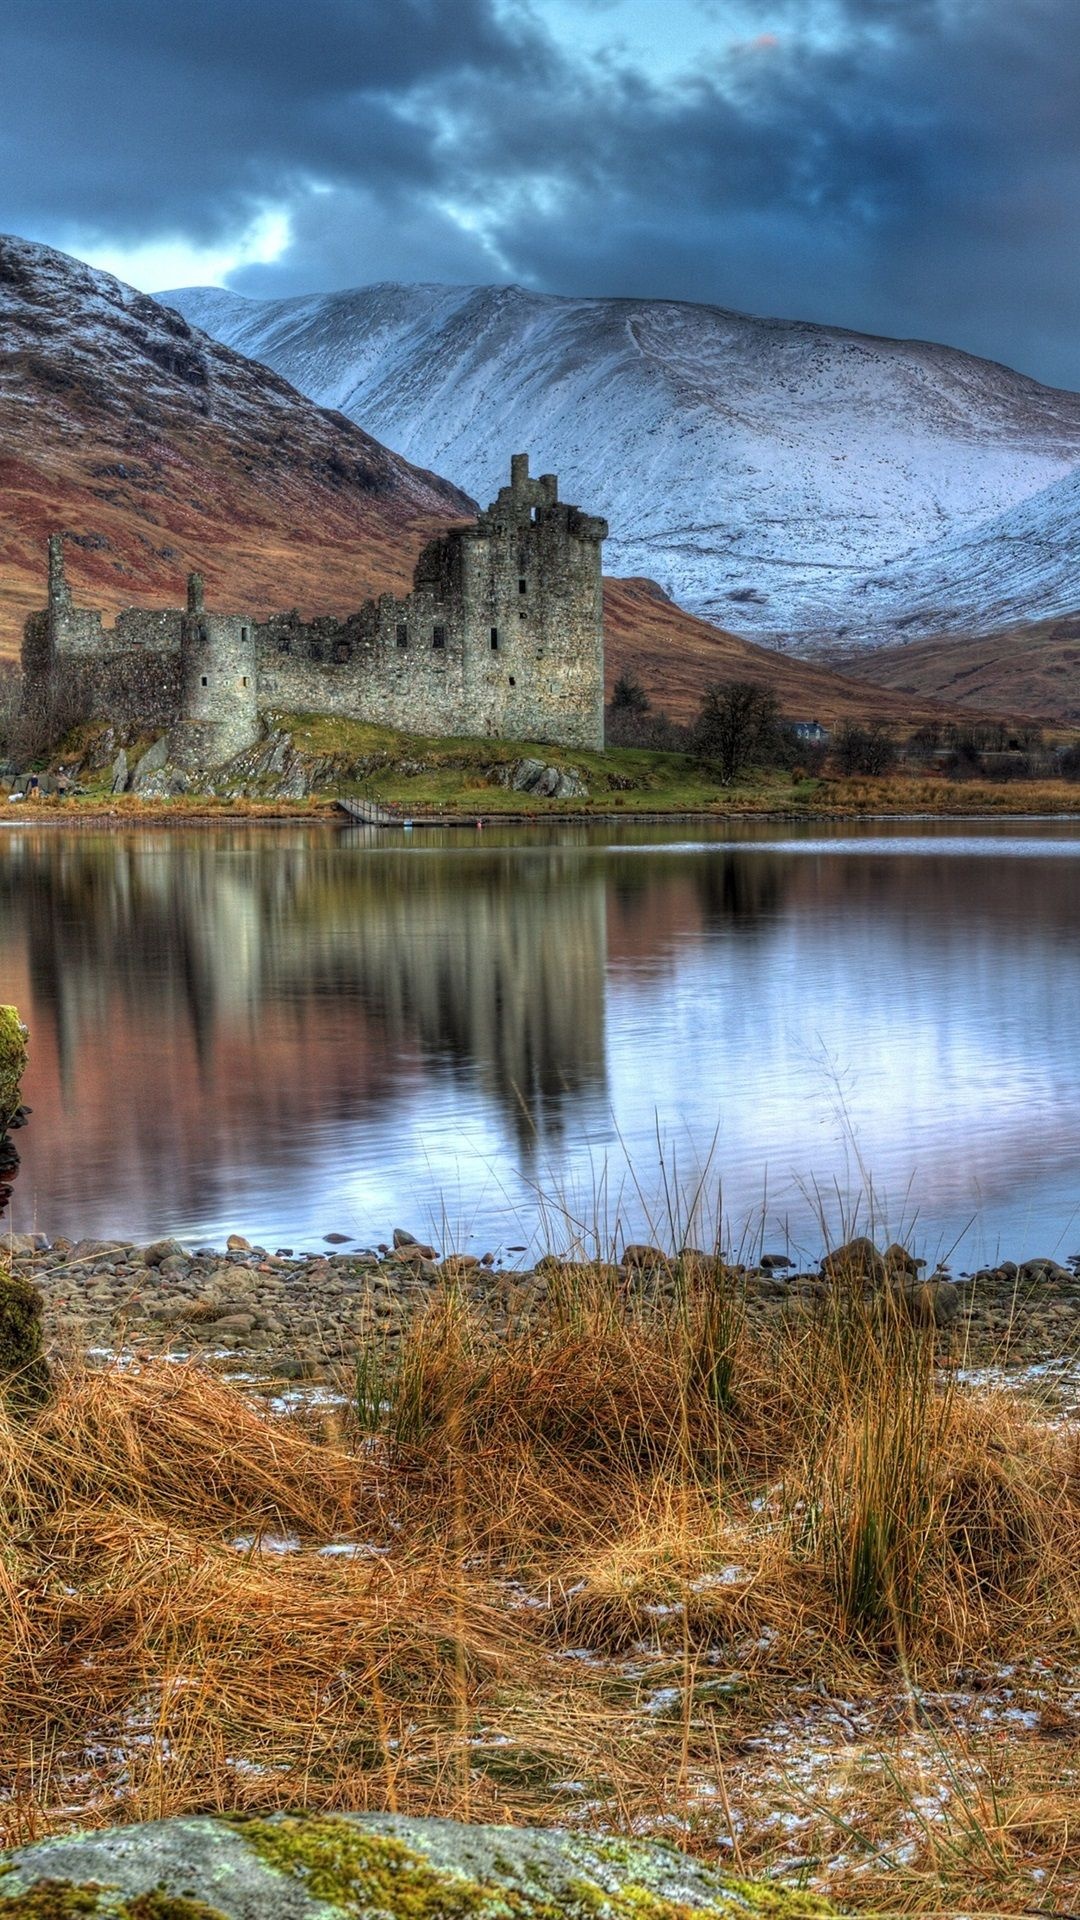 Scottish Highlands iPhone wallpapers, Mobile backgrounds, Highland beauty, On-the-go style, 1080x1920 Full HD Handy